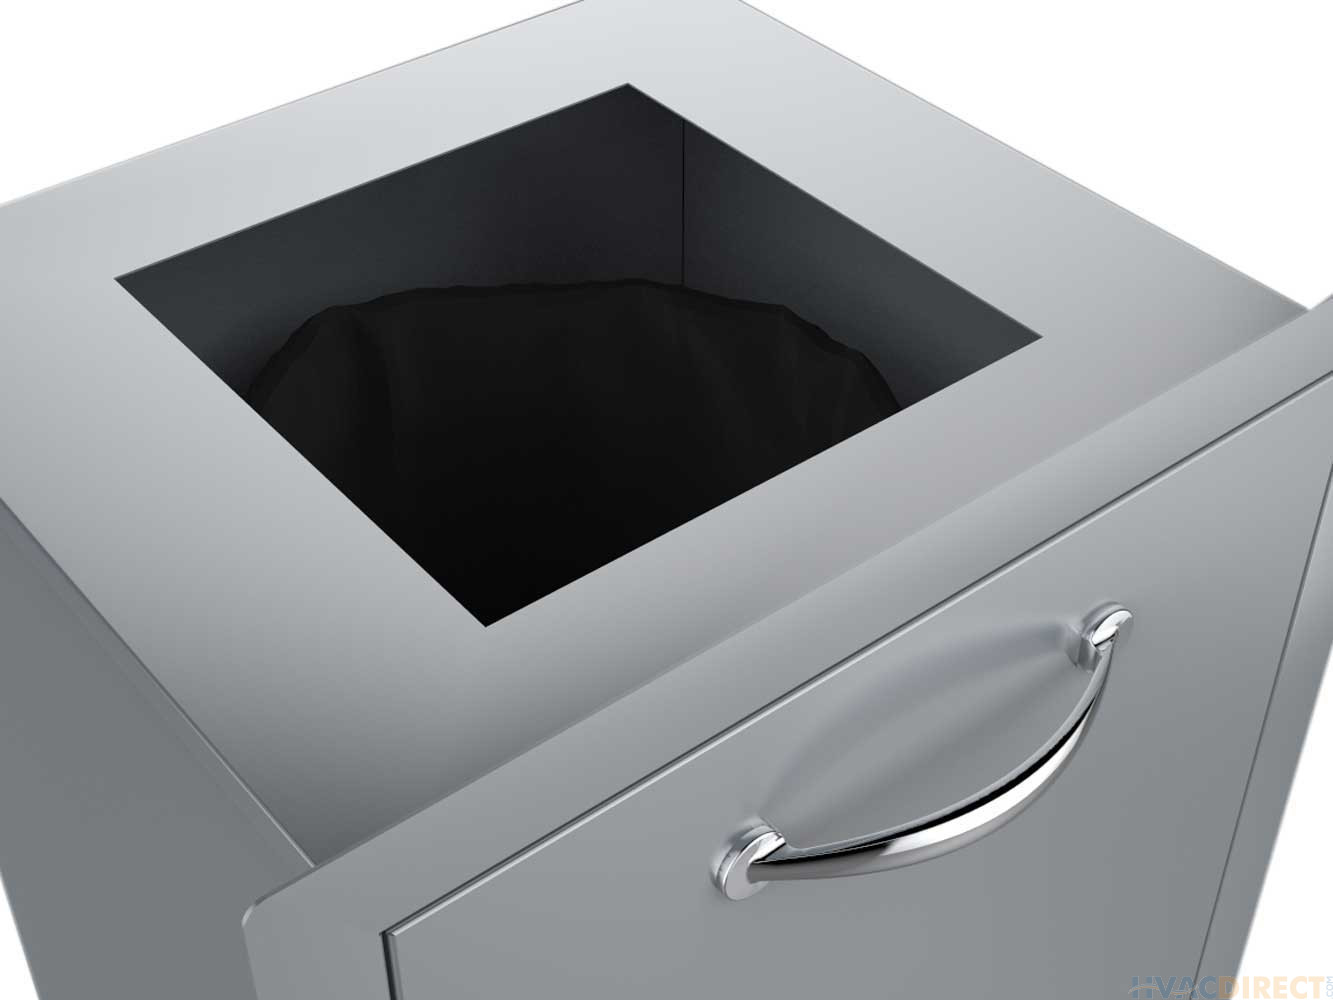 Sunstone Classic 20-Inch Roll-Out Trash Bin - A-TRHD- Drawer Open View